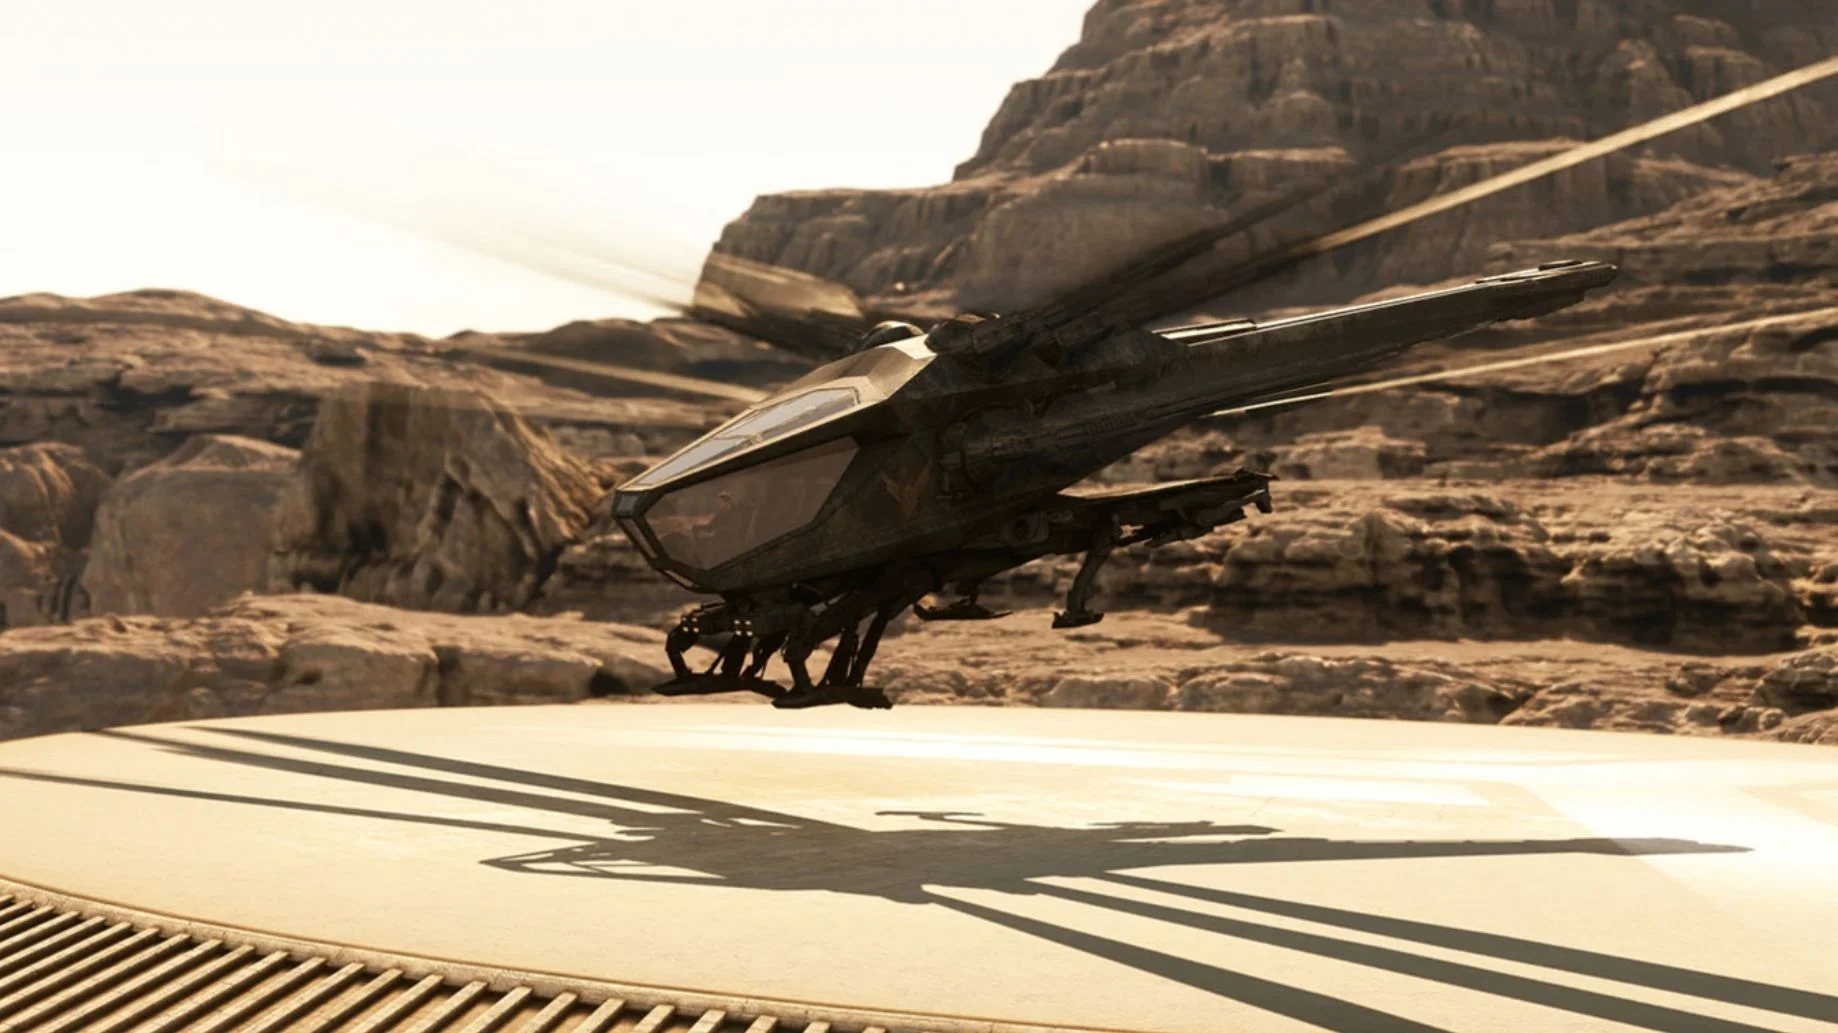 DLC has been released for Microsoft Flight Simulator in honor of the release of the film Dune: Part Two